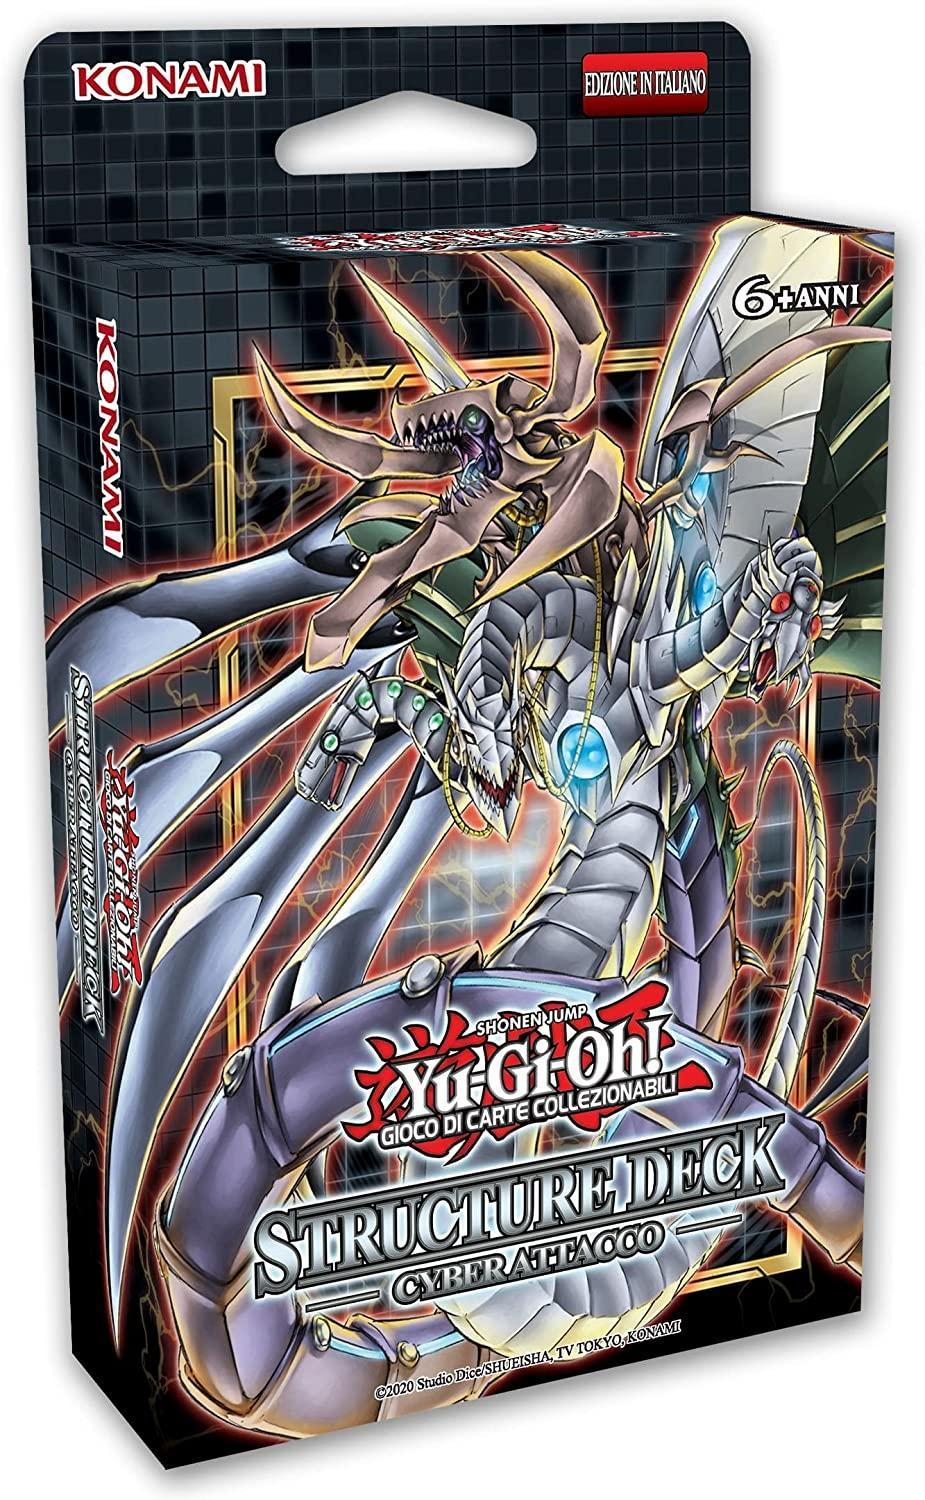 gamevision yu-gi-oh! structure deck cyber attacco